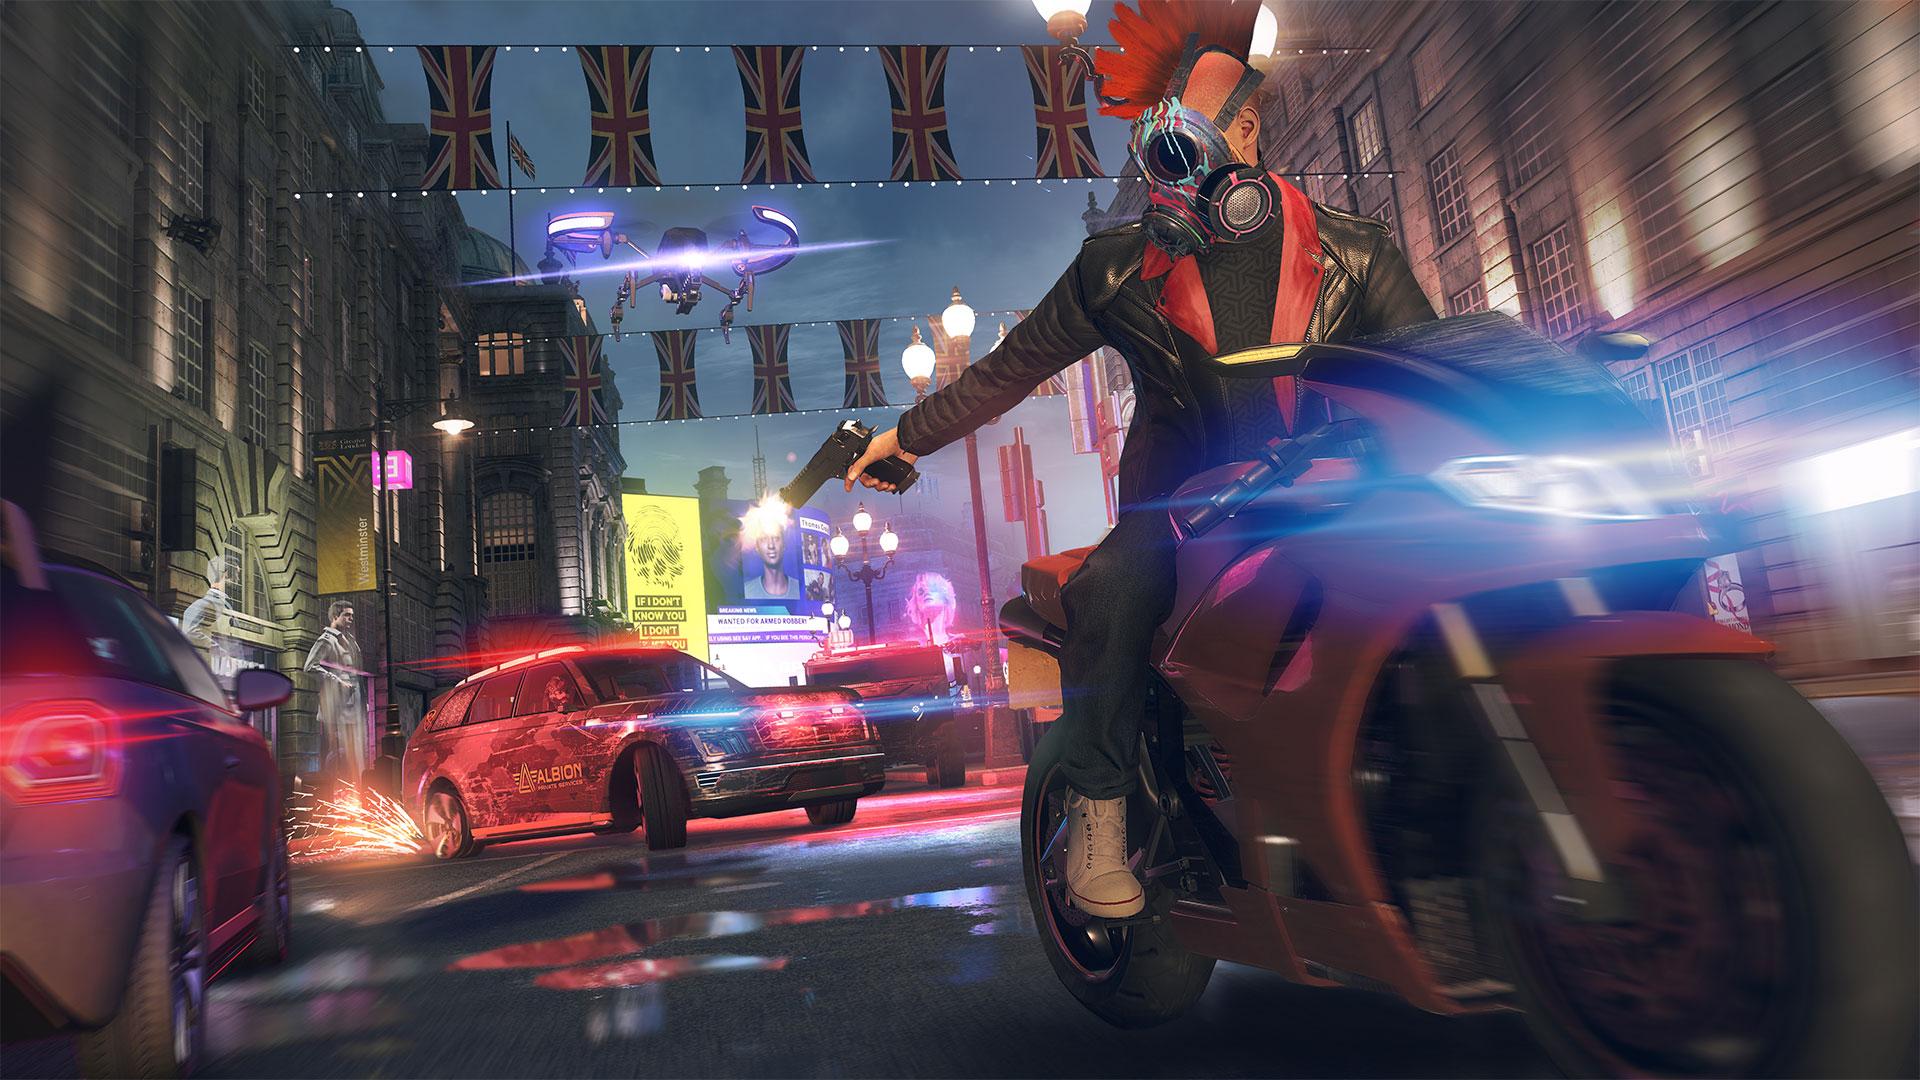 Watch Dogs Legion release date, news, gameplay details and more: Everything we know so far